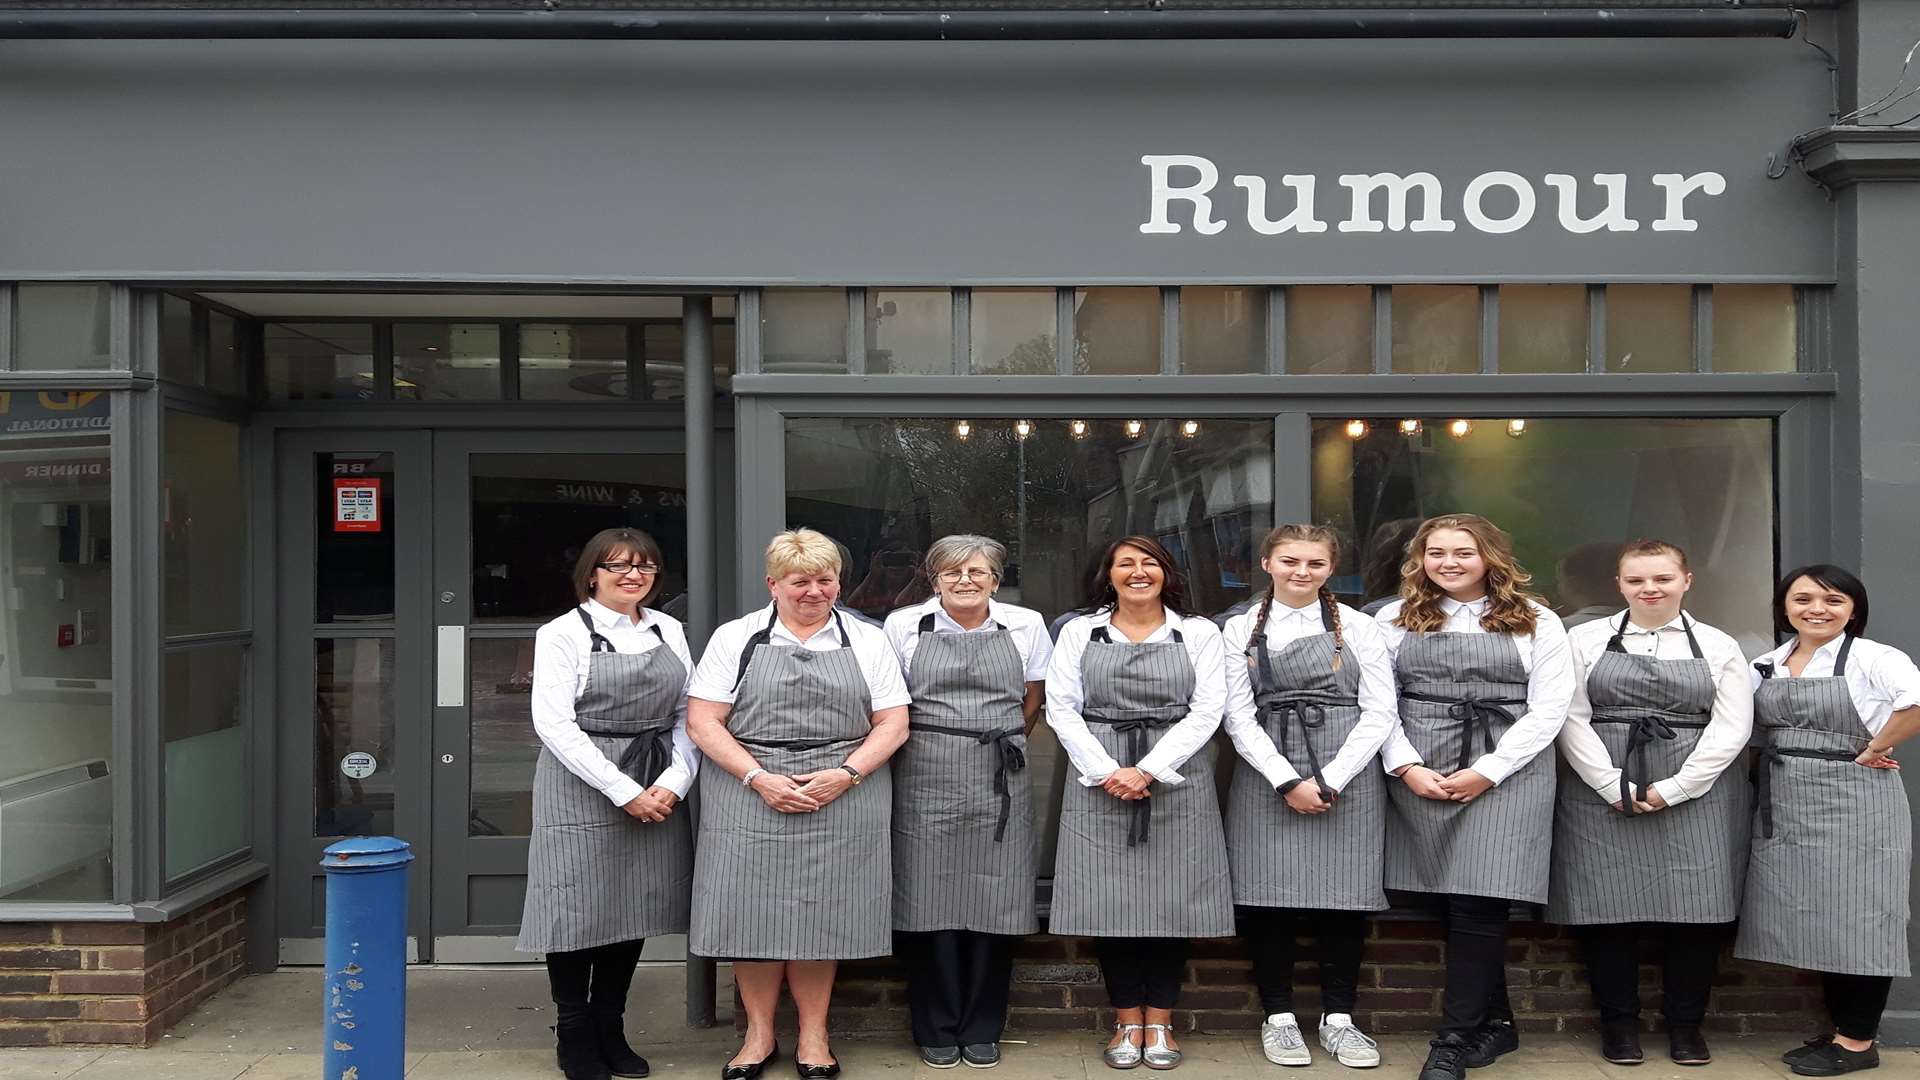 The team behind the brand new Rumour coffee shop in Sheerness High Street.